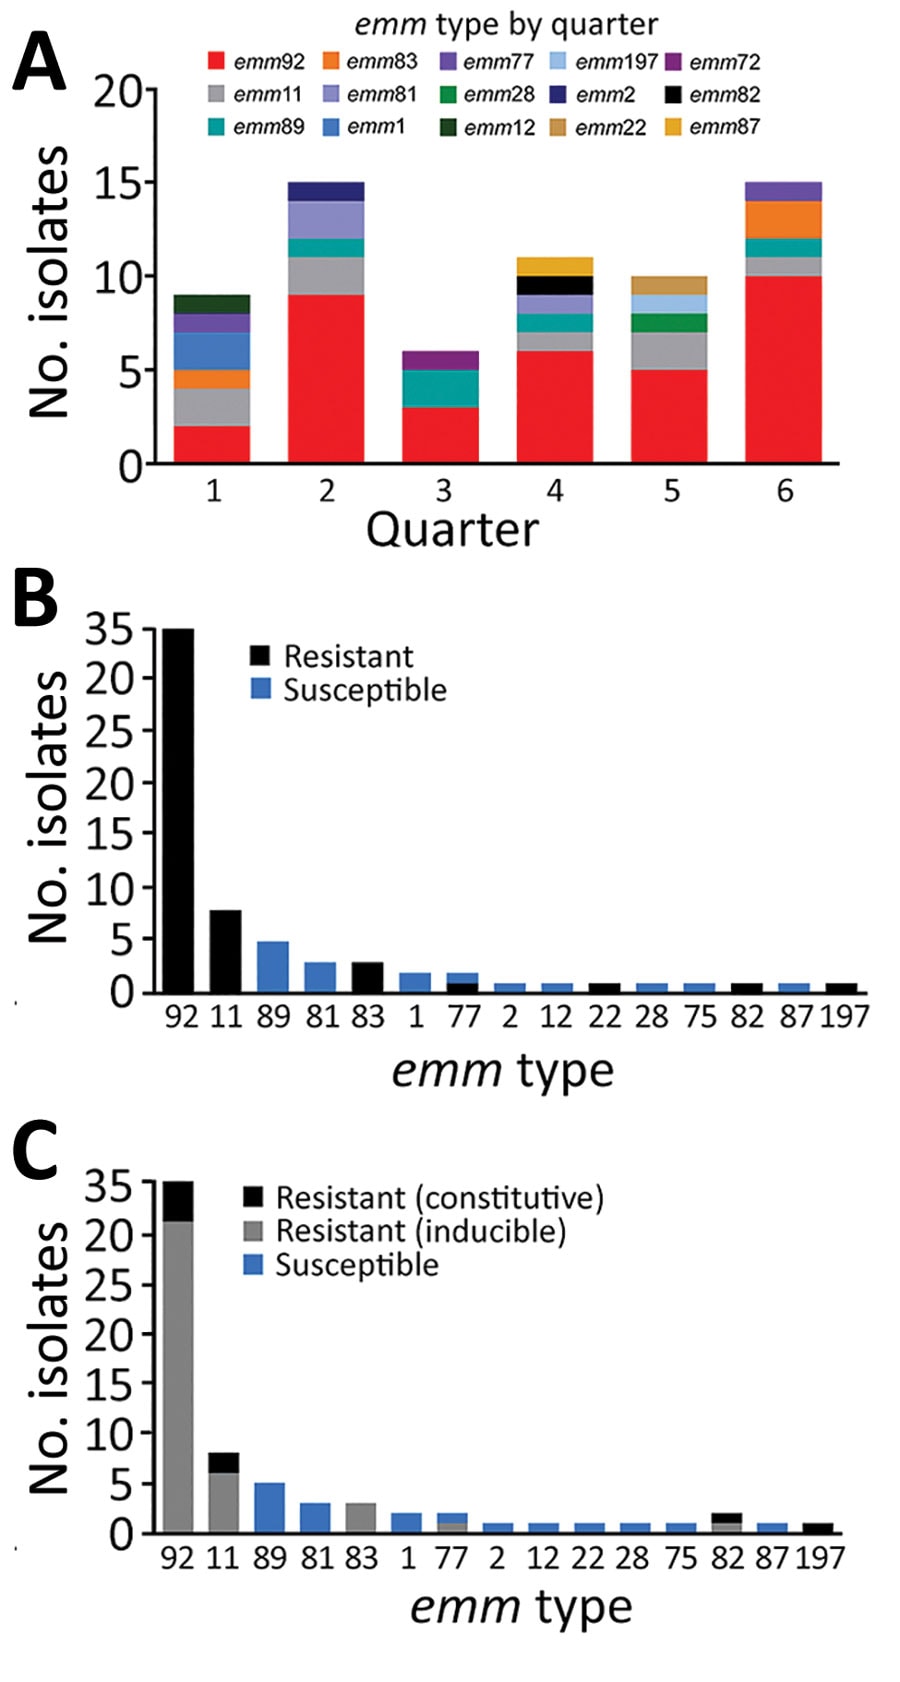 emm type distribution and MLSB resistance among invasive group A Streptococcus isolates, West Virginia, USA, 2020–2021. A) Temporal analysis of isolate emm type by 3-month periods. Specimens harboring isolates were collected during January 2020–June 2021, represented by consecutive quarters numbered 1–6. Graph indicates trend of emm92 isolates predominating each quarter over the study period. B, C) MLSB susceptibility and resistance profiles. The number of isolates resistant to erythromycin (B) and clindamycin (C) by emm type was determined on the basis of antimicrobial susceptibility testing. Isolates were deemed nonsusceptible to clindamycin if they had either an inducible or constitutive resistance phenotype and deemed susceptible in the absence of growth as determined by D-test. 